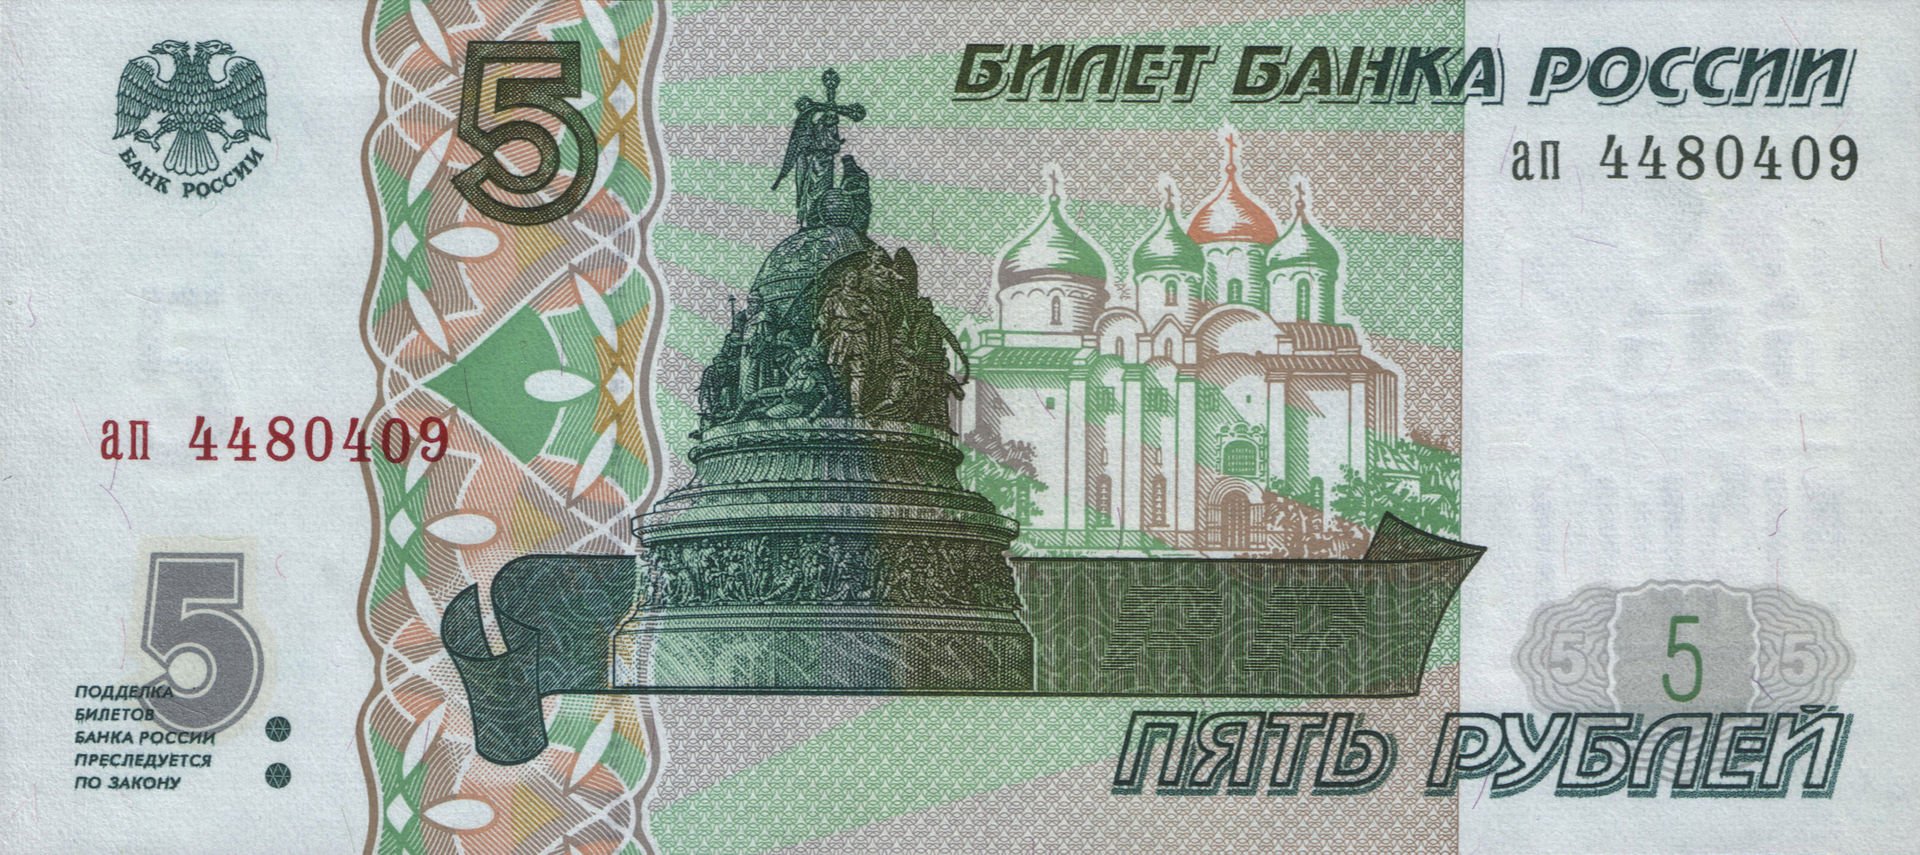 Banknote_5_rubles_(1997)_front